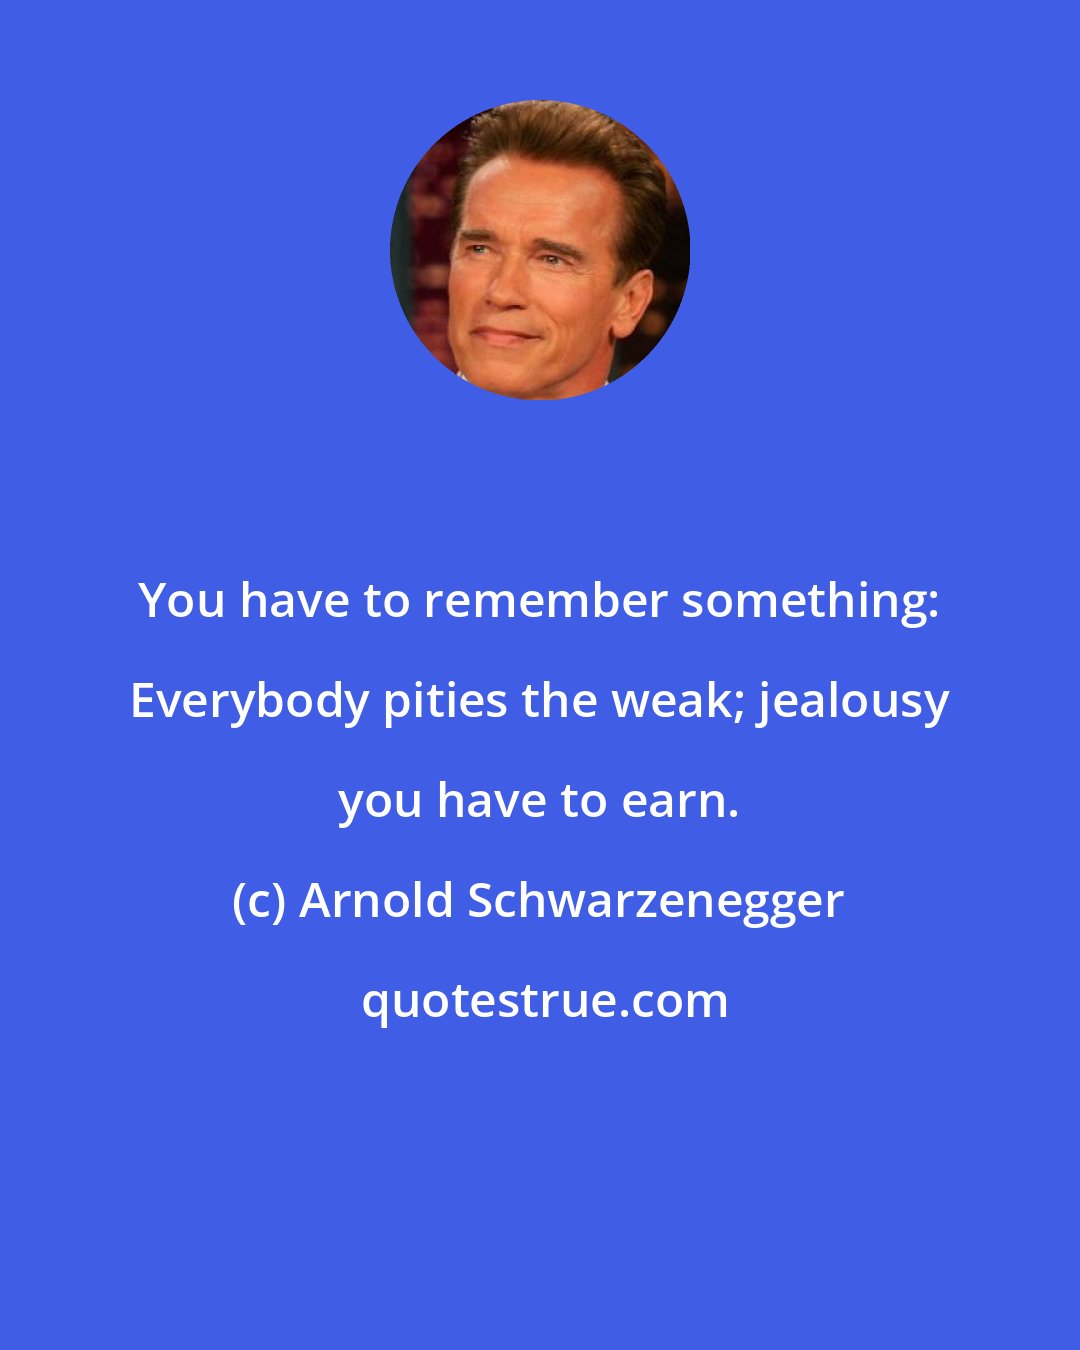 Arnold Schwarzenegger: You have to remember something: Everybody pities the weak; jealousy you have to earn.